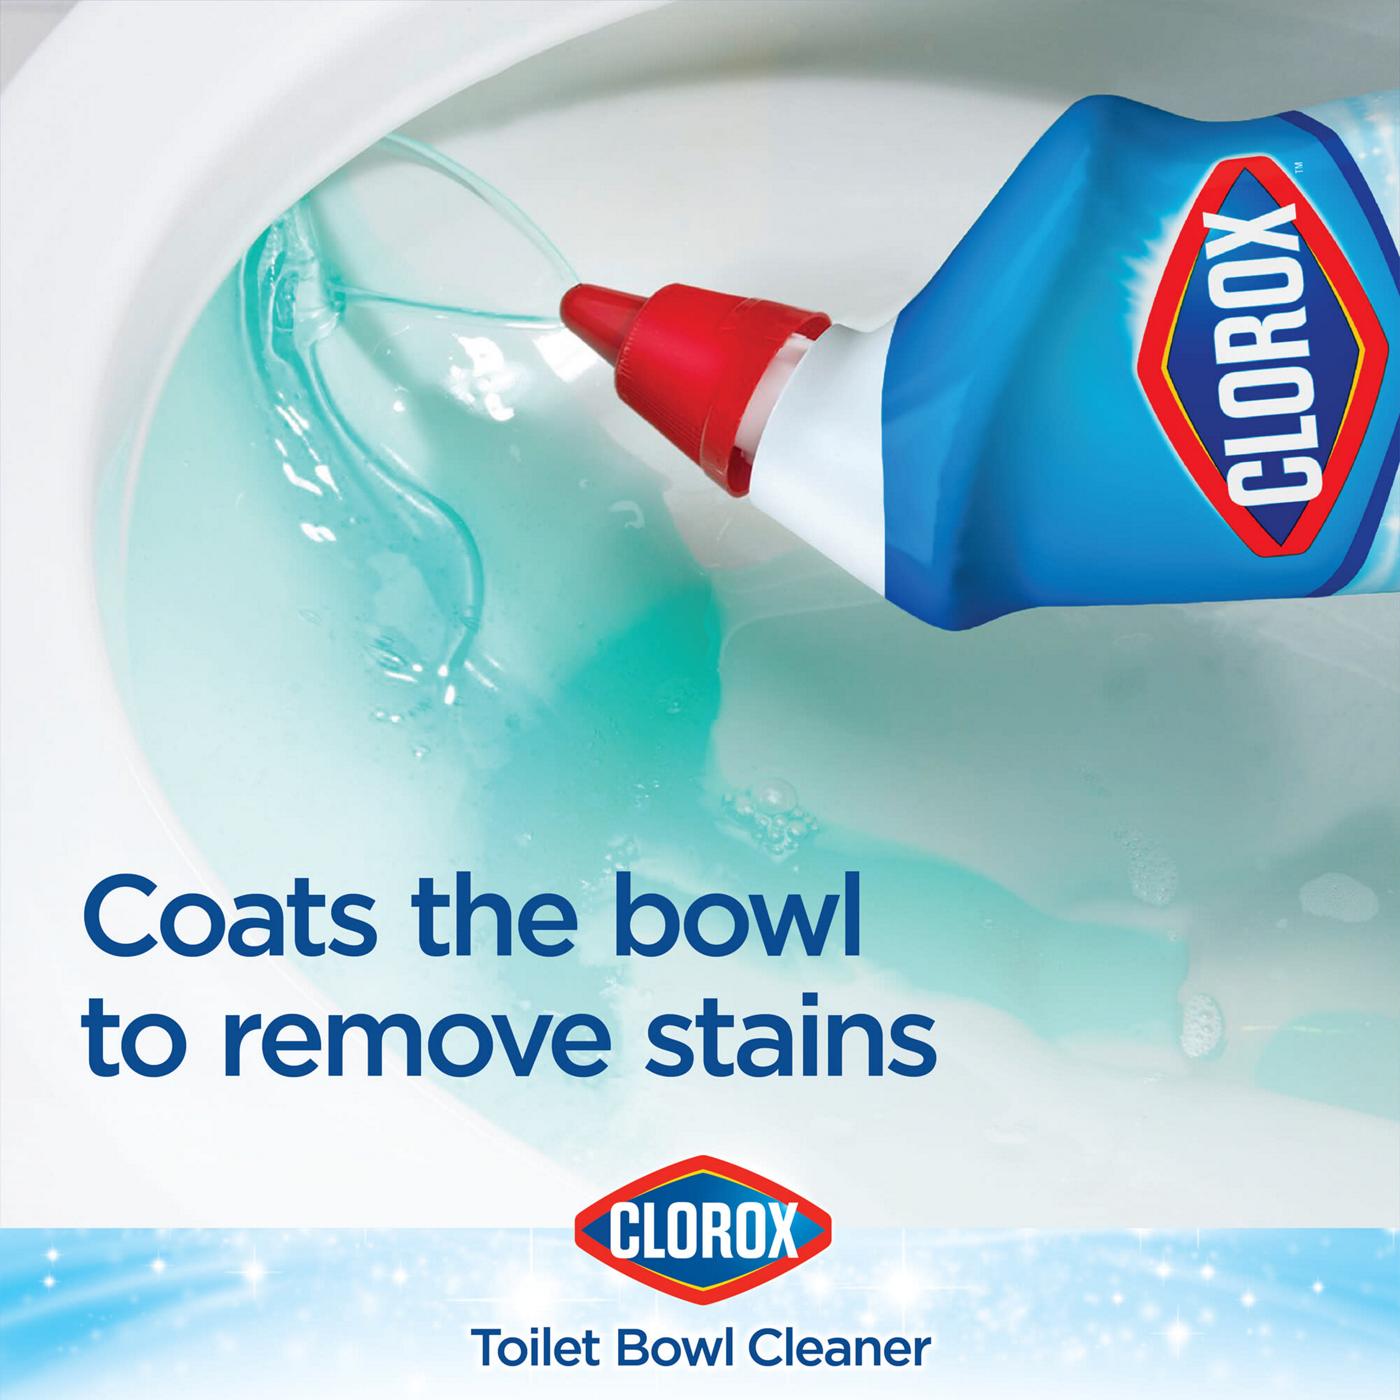 Clorox Fresh Toilet Bowl Cleaner with Bleach; image 4 of 4